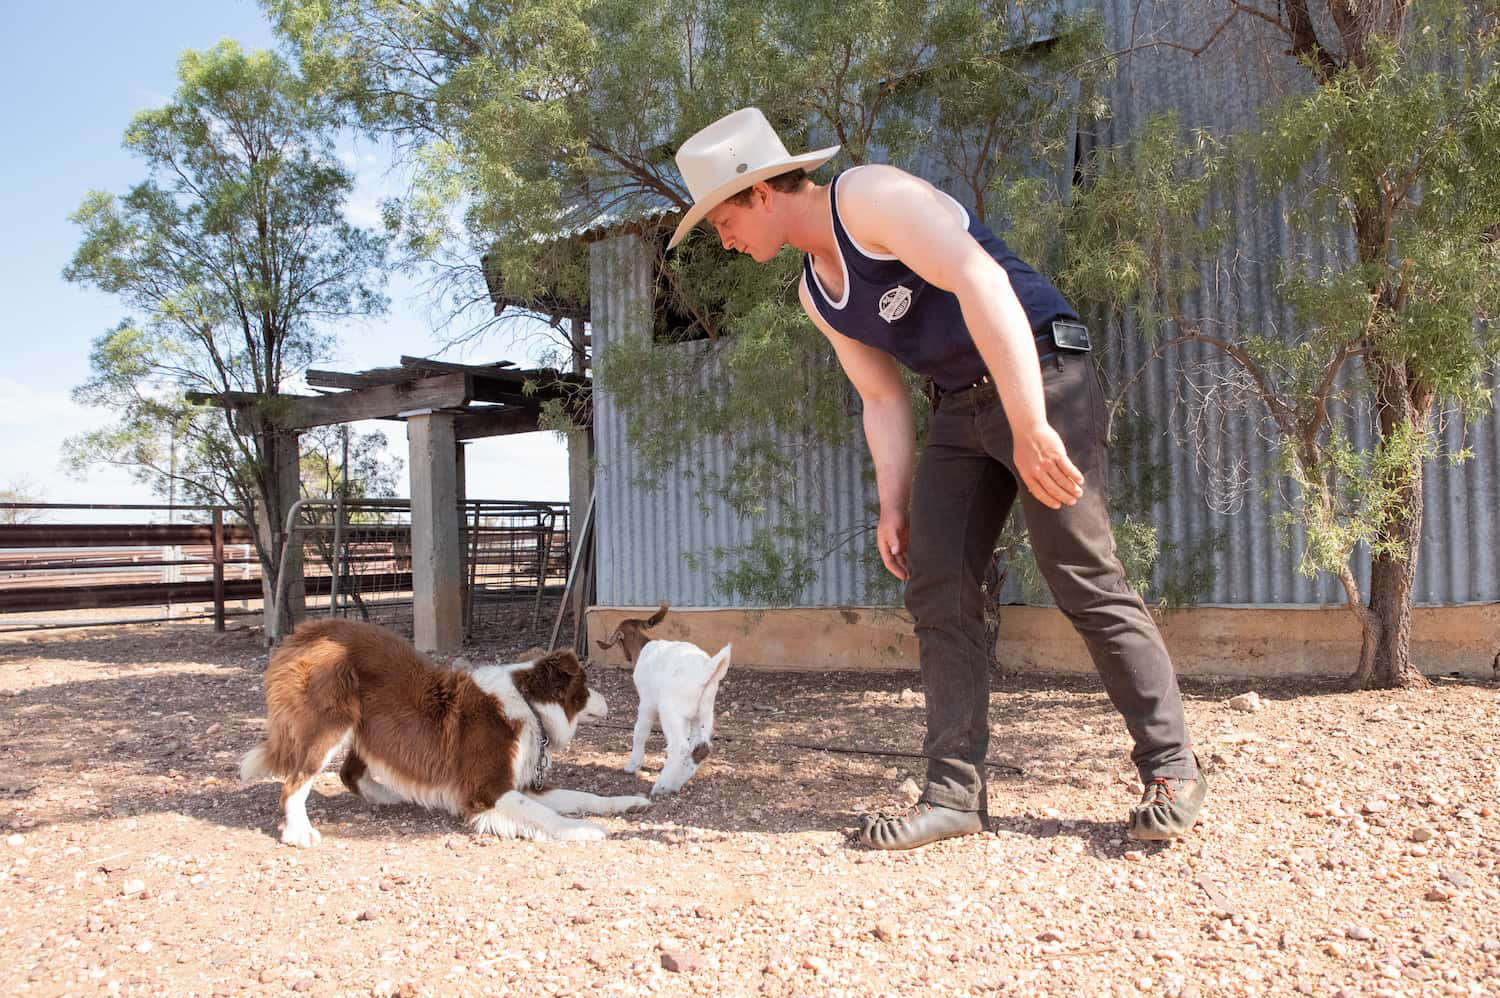 The shearer outside the shearing shed with border collie dog and baby goat